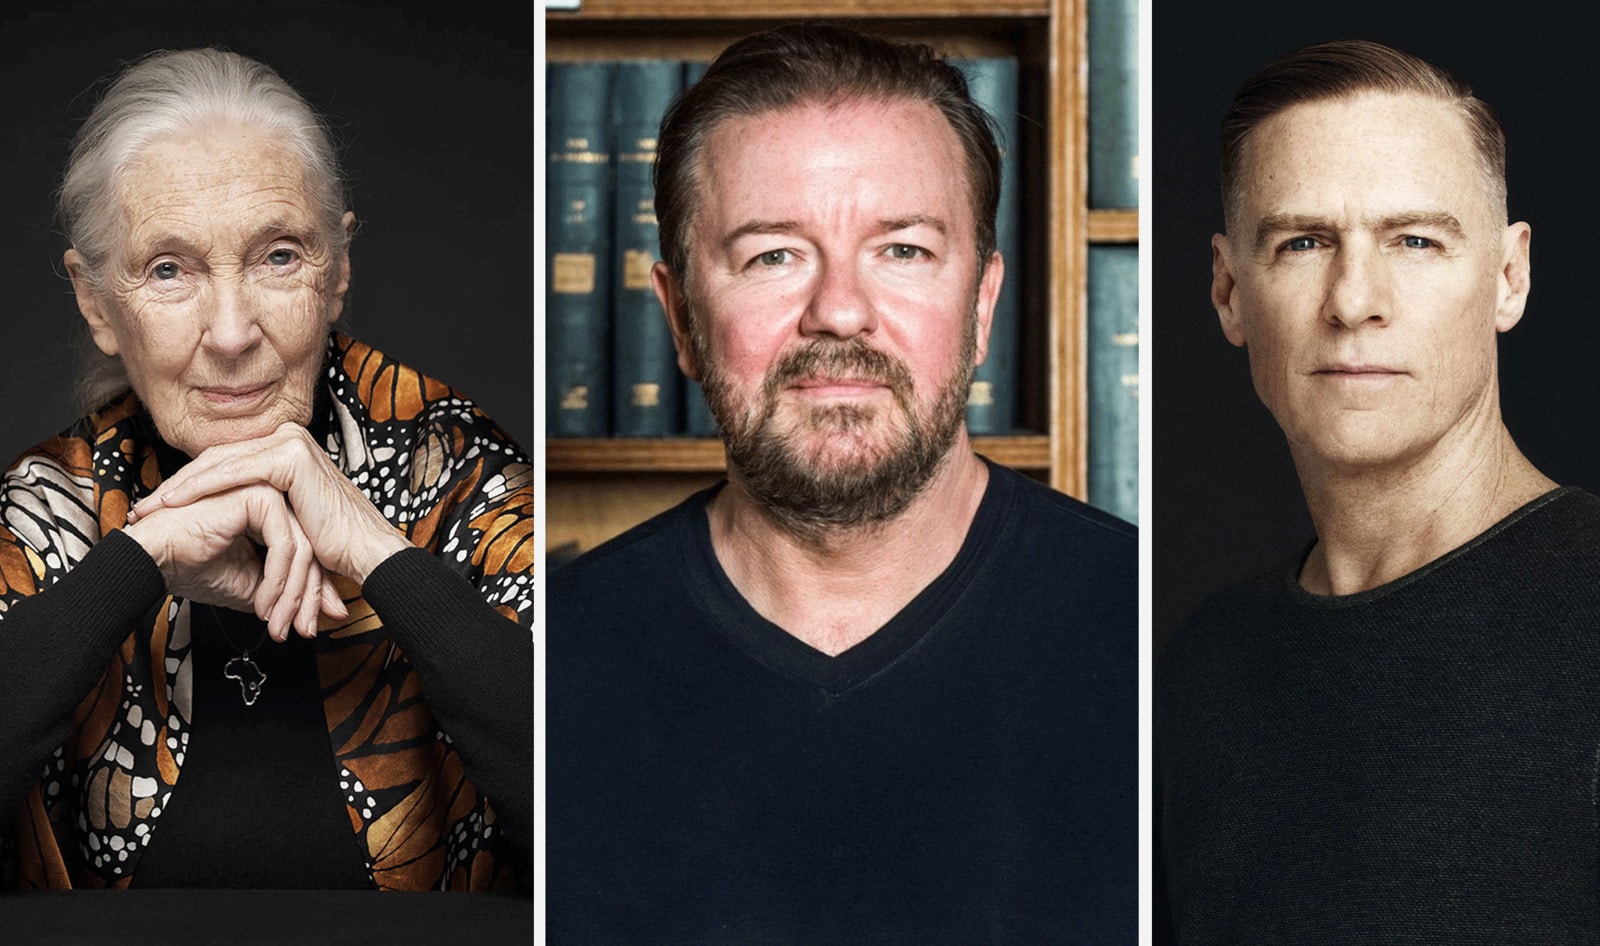 Jane Goodall, Ricky Gervais, Bryan Adams, and 100 Other Celebrities Sign Open Letter Urging Public to Go Vegan in January